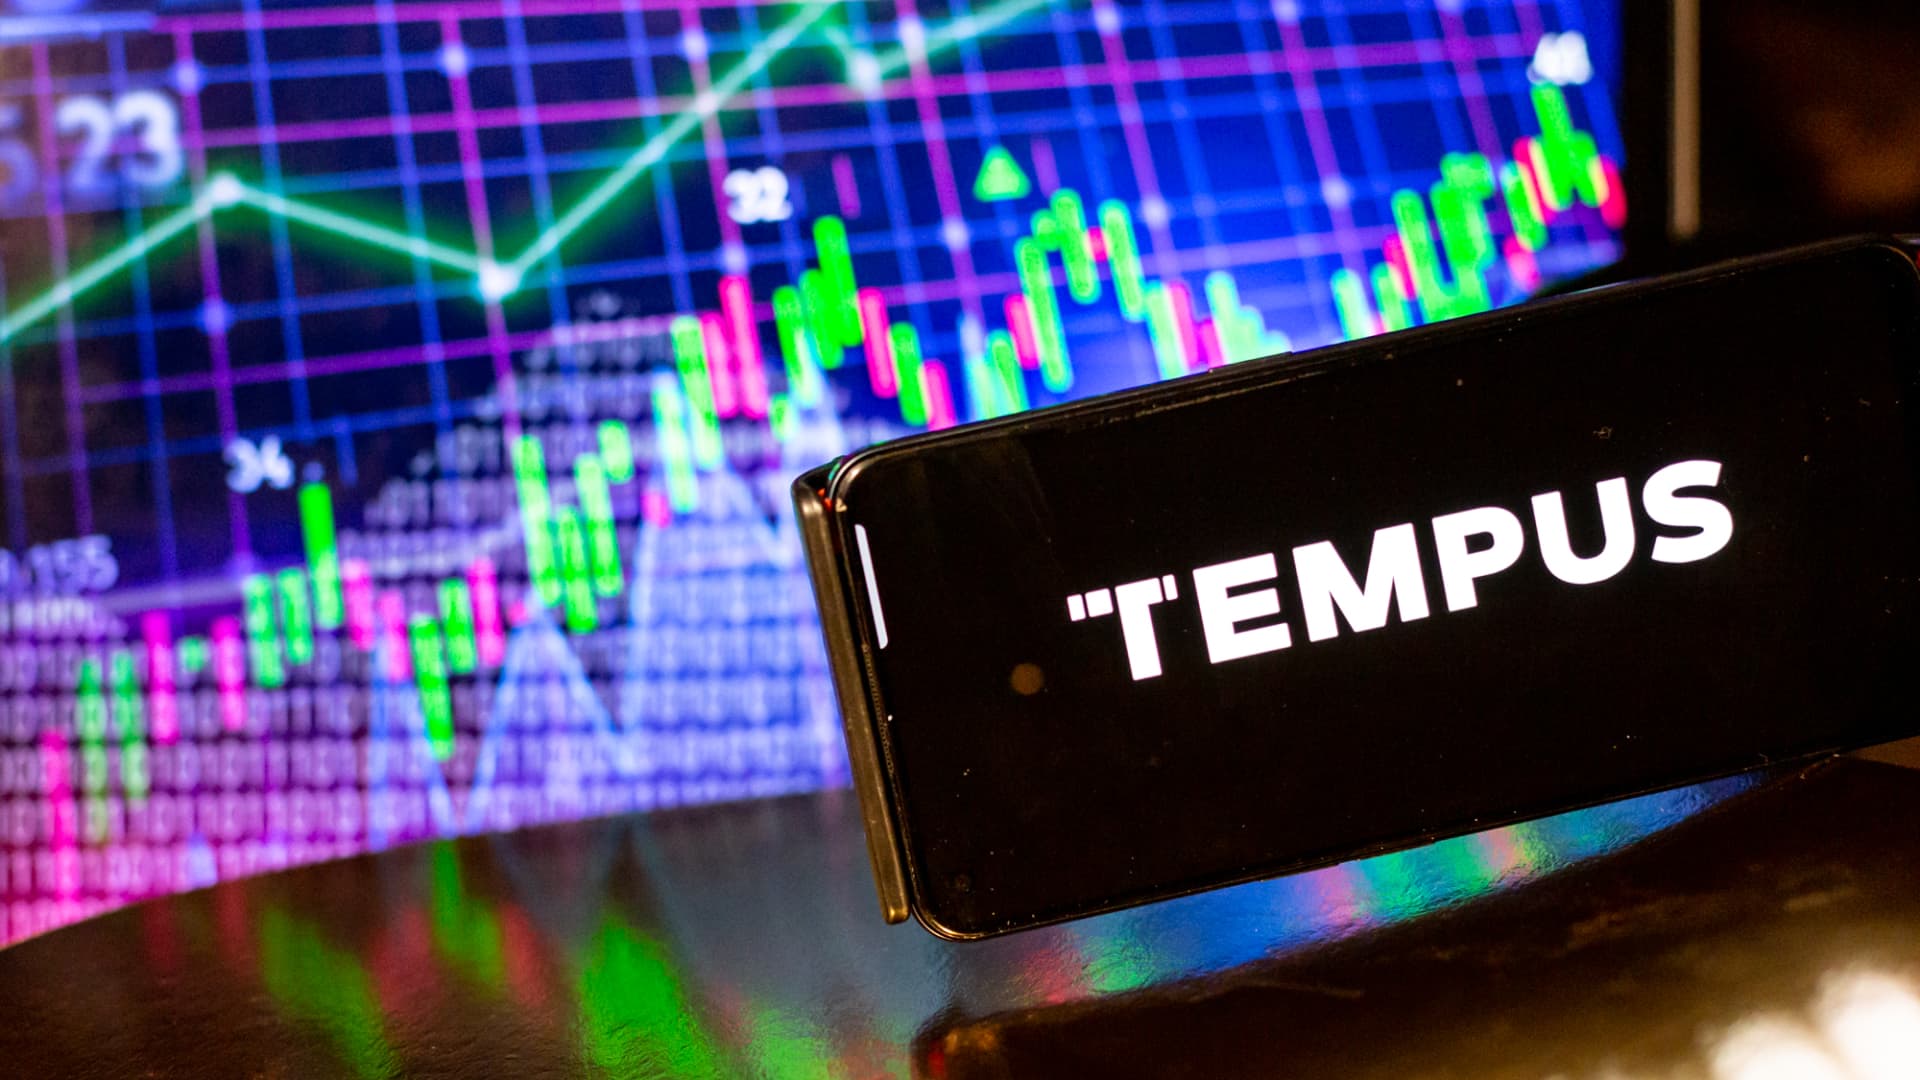 Google-backed Tempus AI pops by as much as 15% in Nasdaq debut